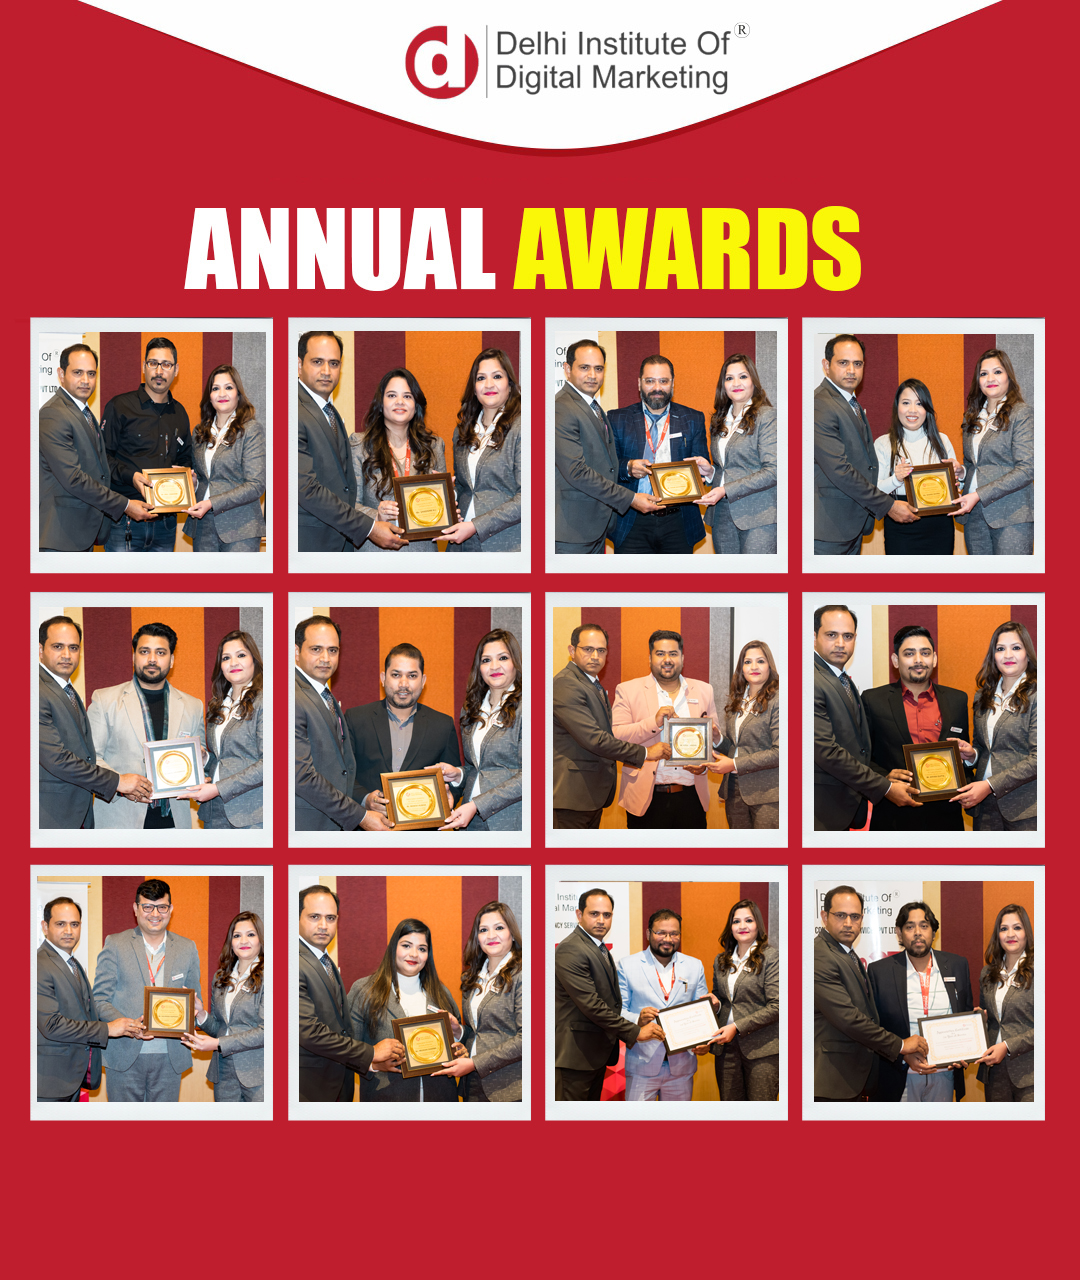 DIDM ANNUAL AWARDS AND CERTIFICATES DISTRIBUTION